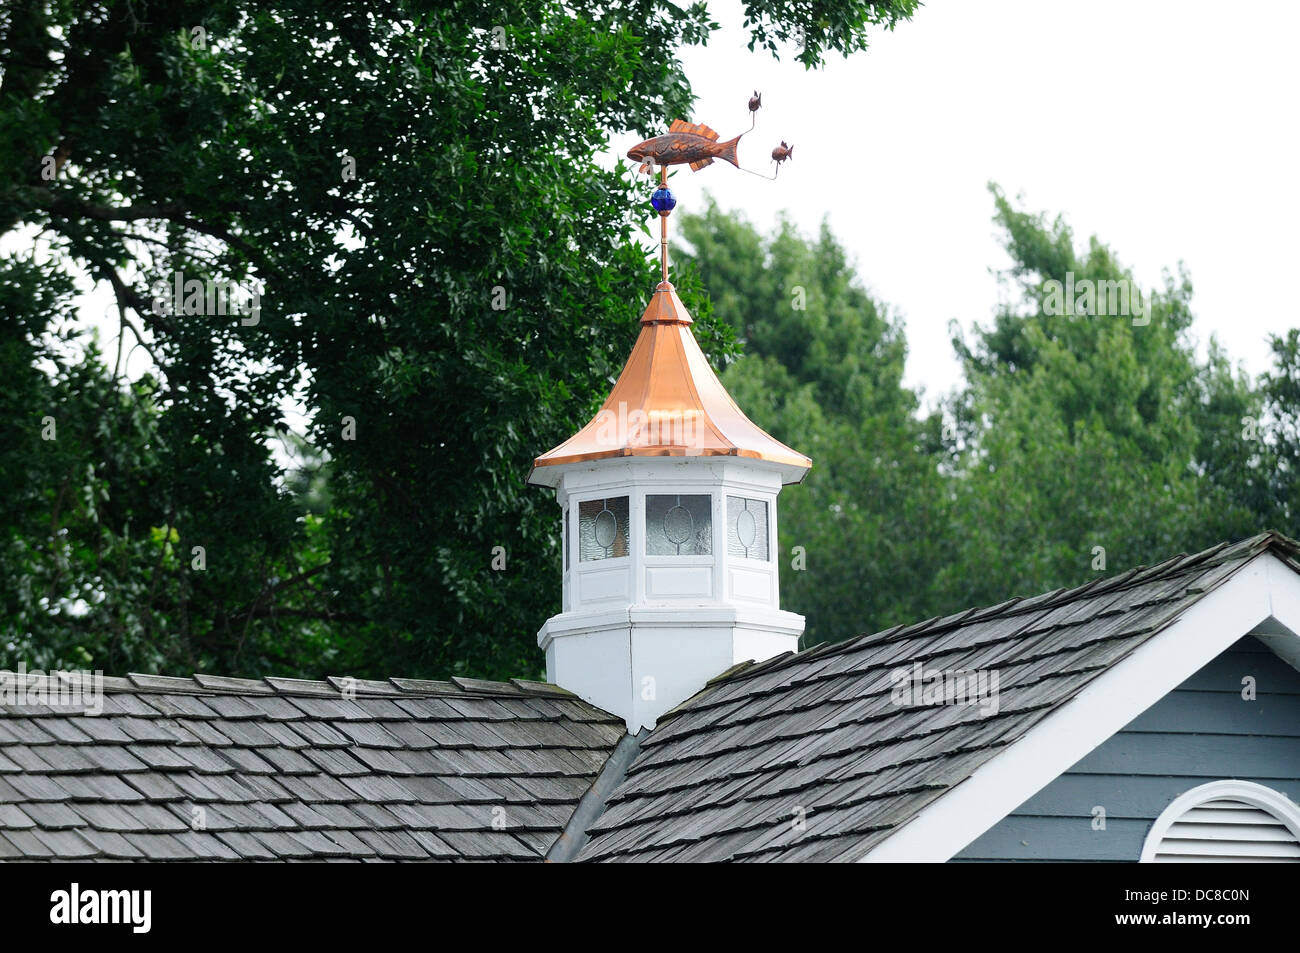 Steeple and weathervane atop boat house. Stock Photo